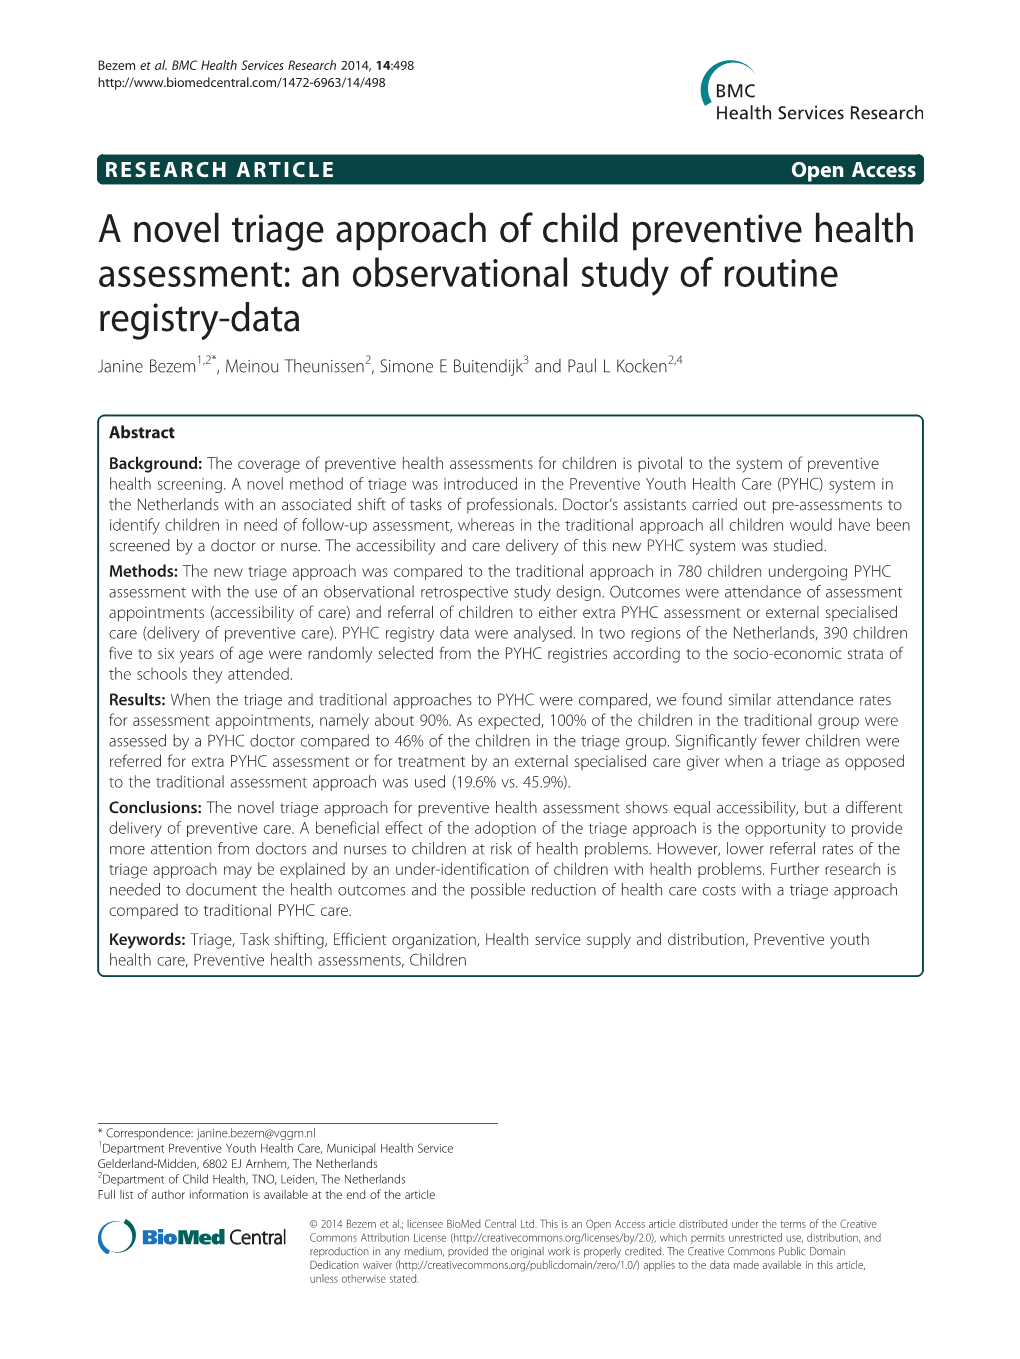 A Novel Triage Approach of Child Preventive Health Assessment